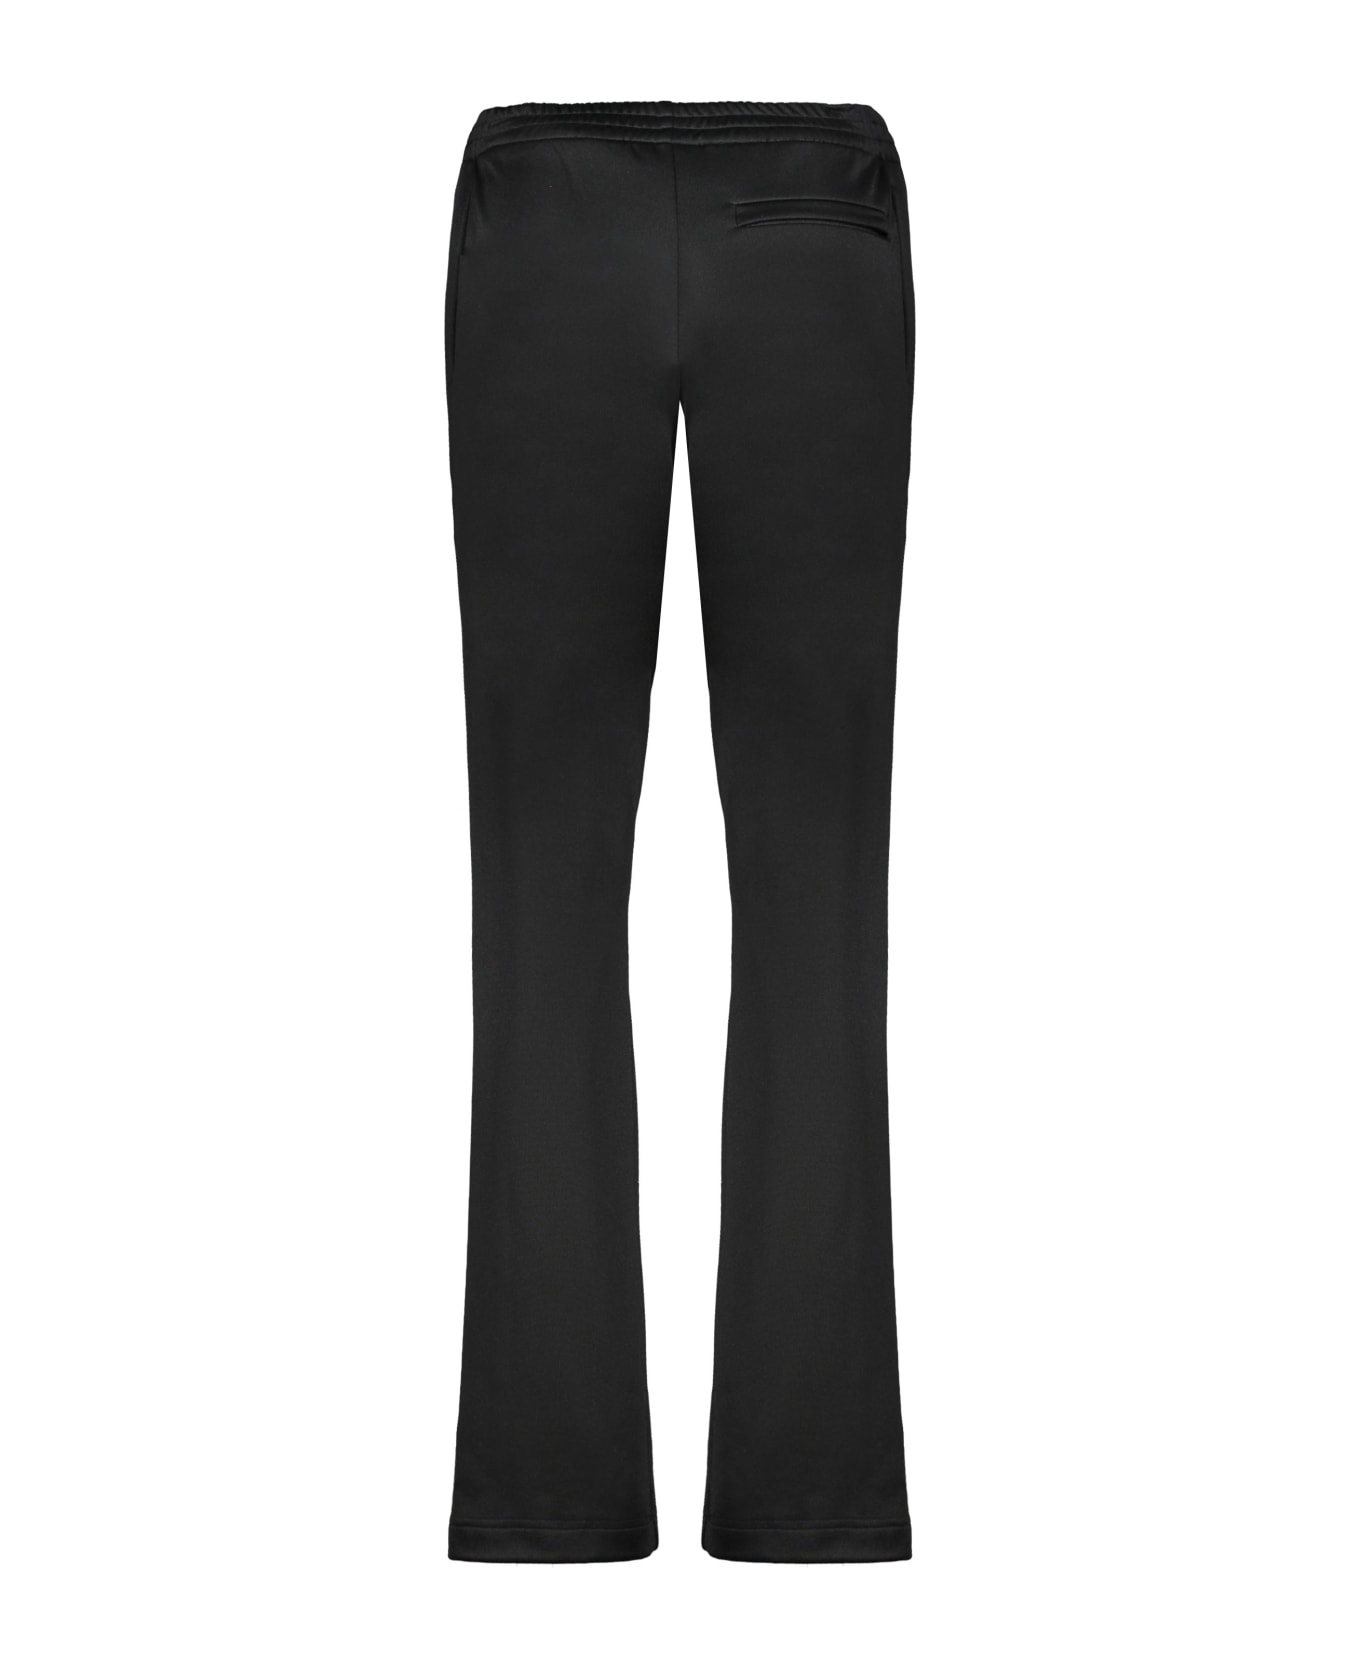 Burberry Long Trousers - black ボトムス